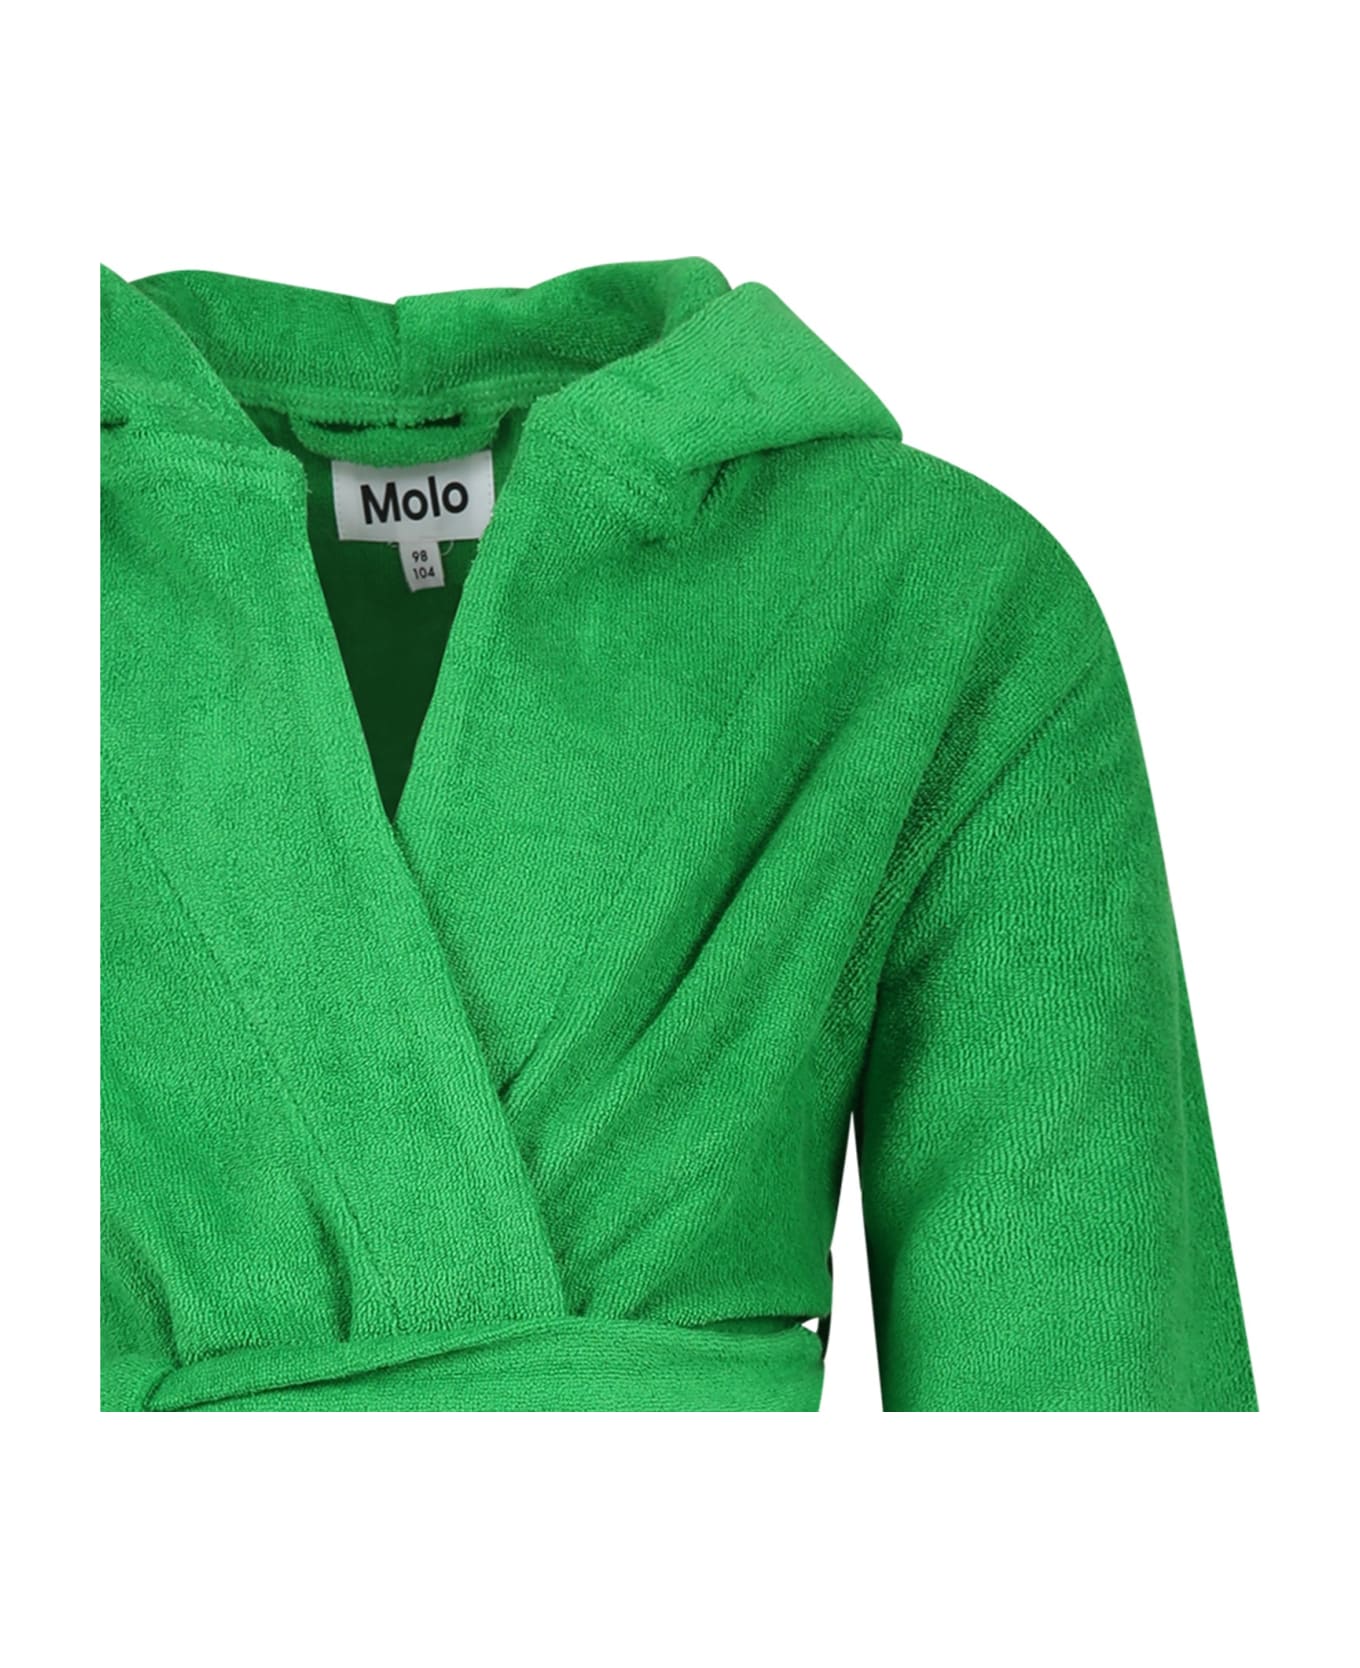 Molo Green Dressing Gown For Kids - Green